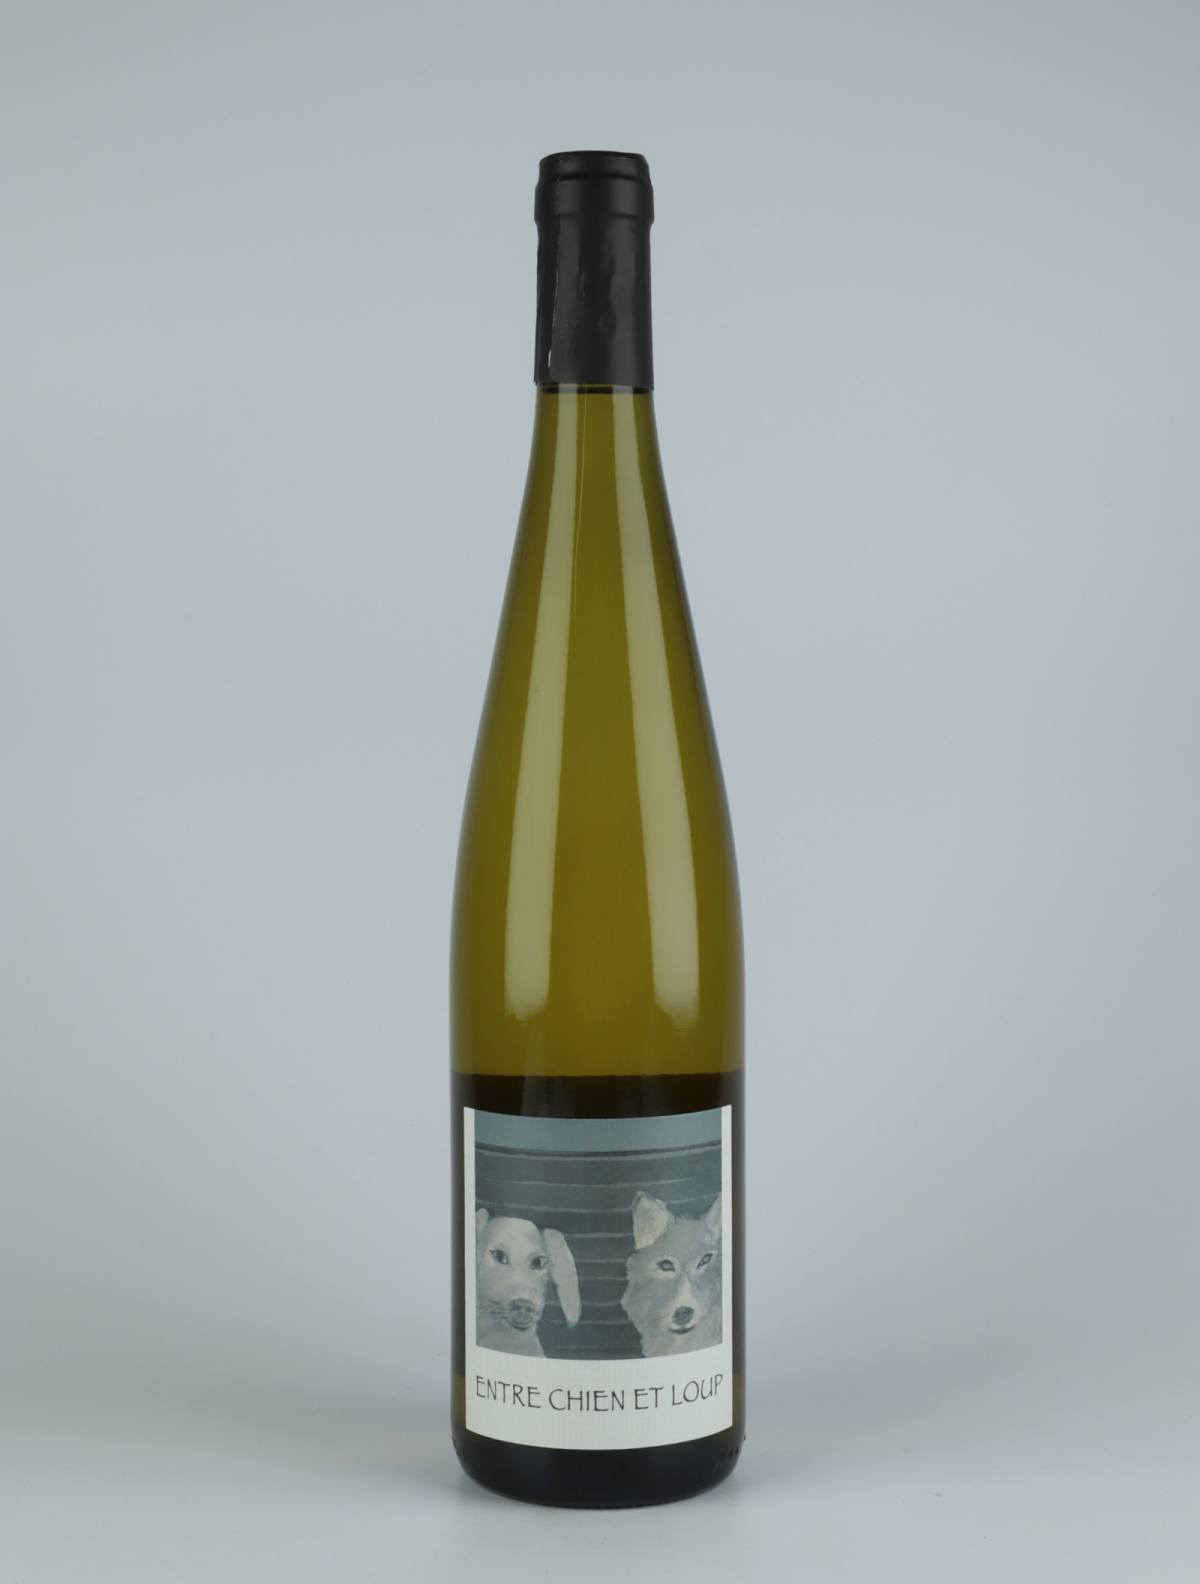 A bottle 2020 Entre Chien et Loup White wine from Domaine Rietsch, Alsace in France